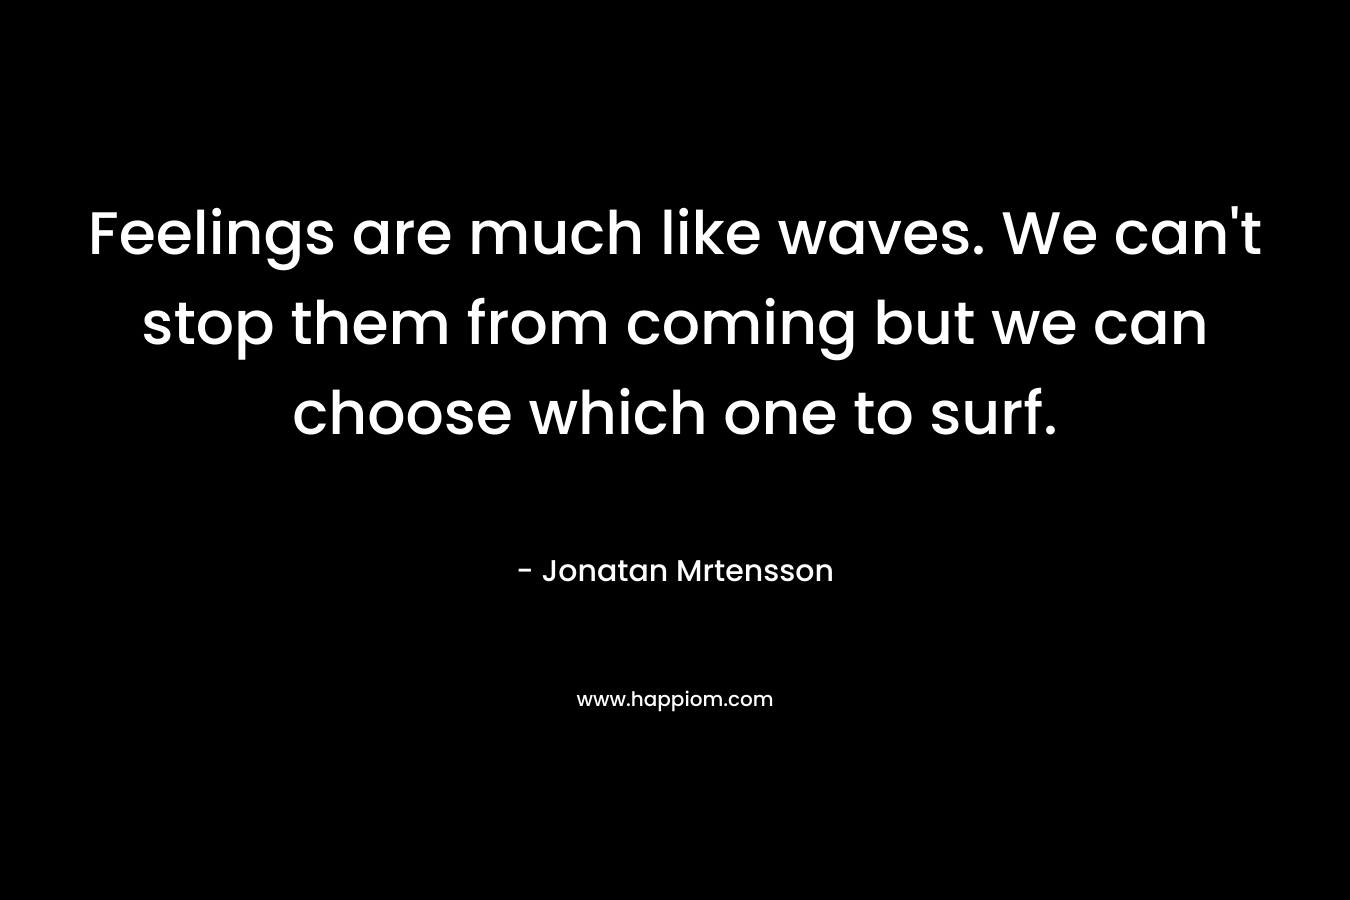 Feelings are much like waves. We can’t stop them from coming but we can choose which one to surf. – Jonatan Mrtensson